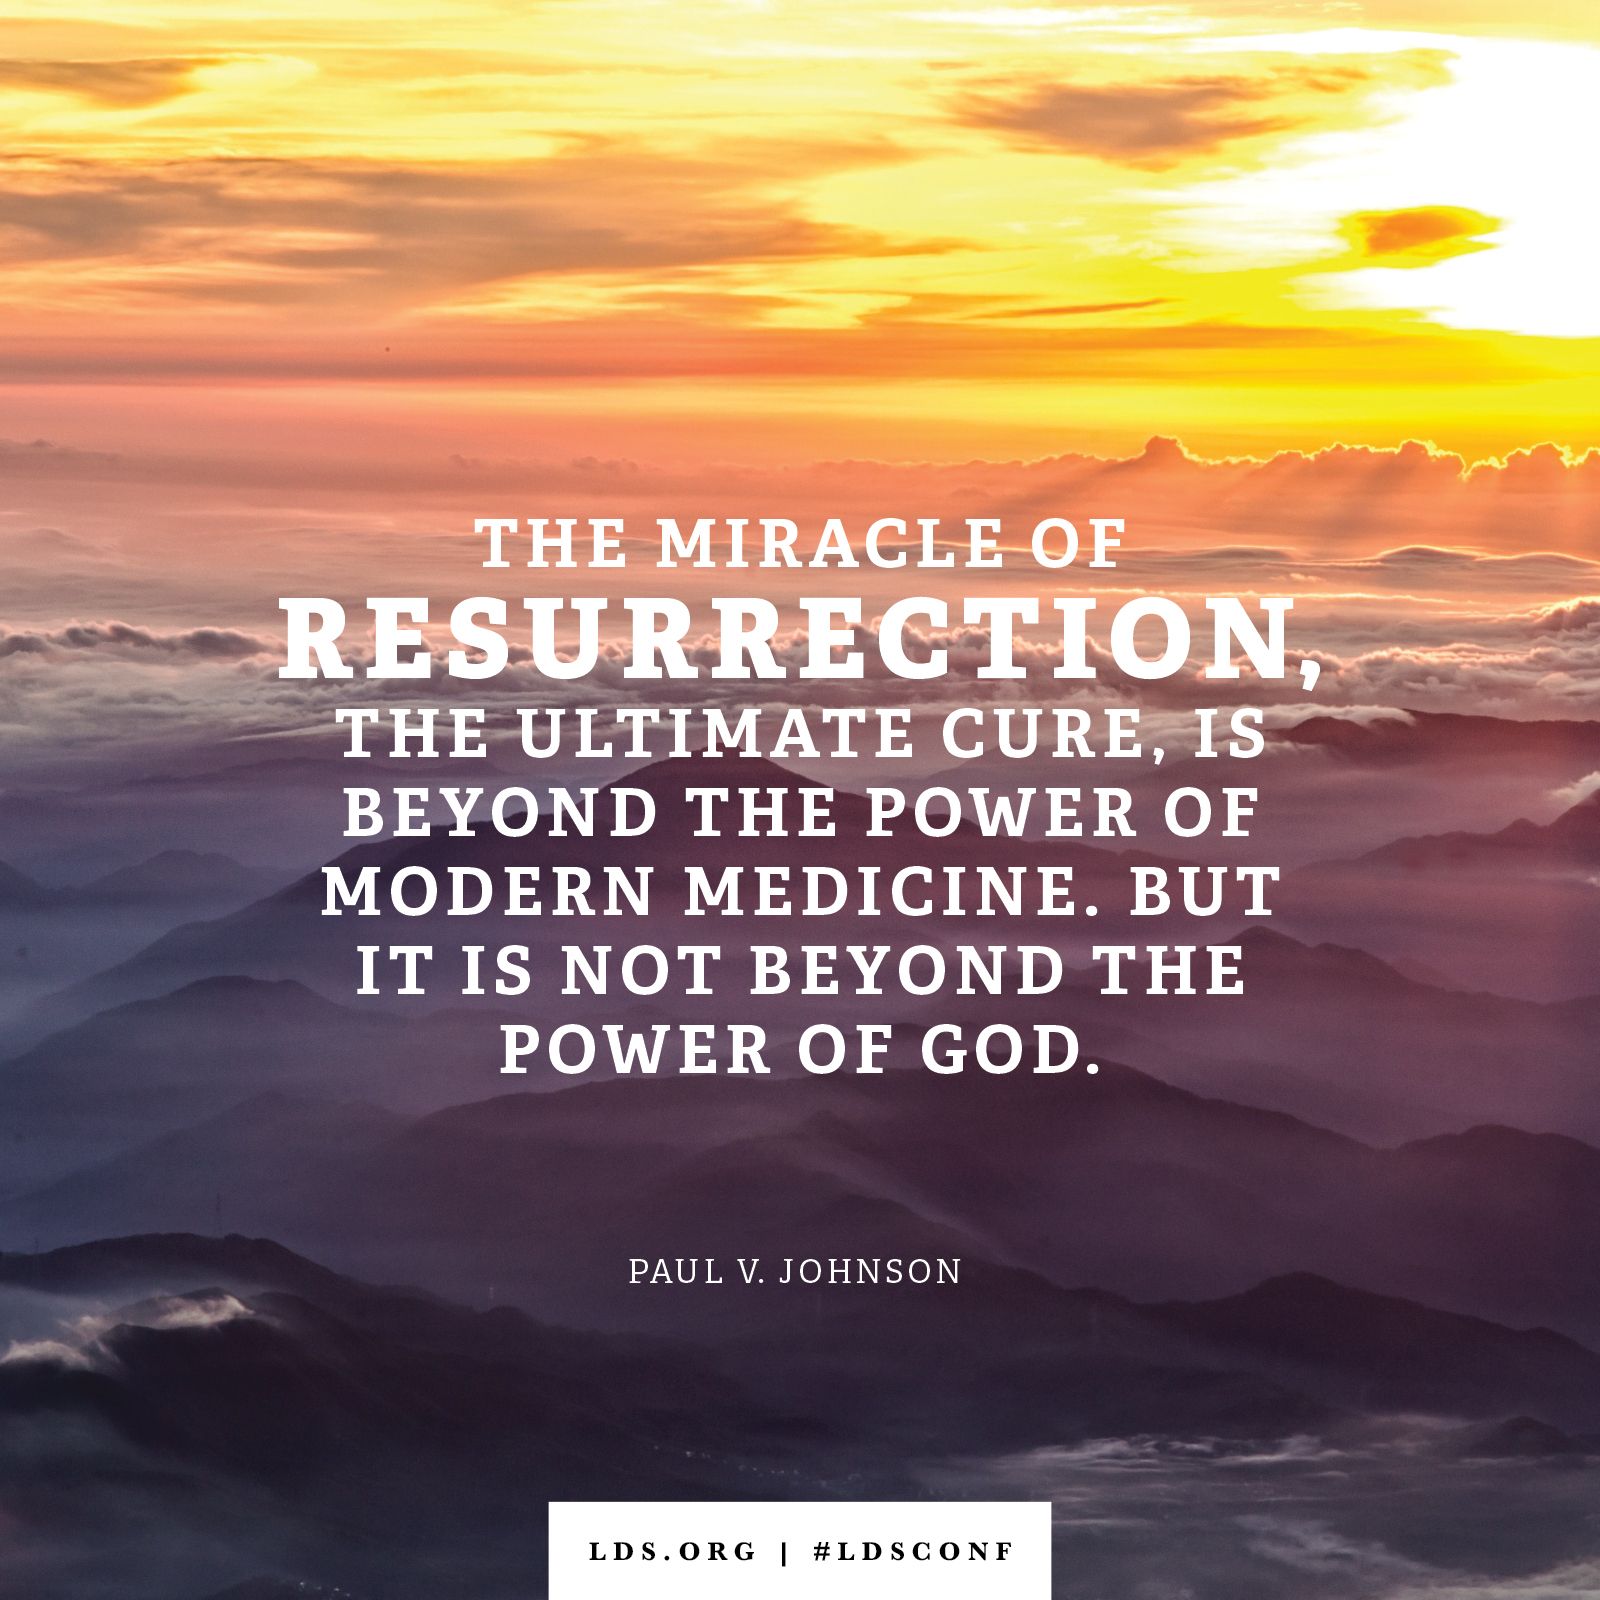 “The miracle of resurrection, the ultimate cure, is beyond the power of modern medicine. But it is not beyond the power of God.” —Elder Paul V. Johnson, “And There Shall Be No More Death”